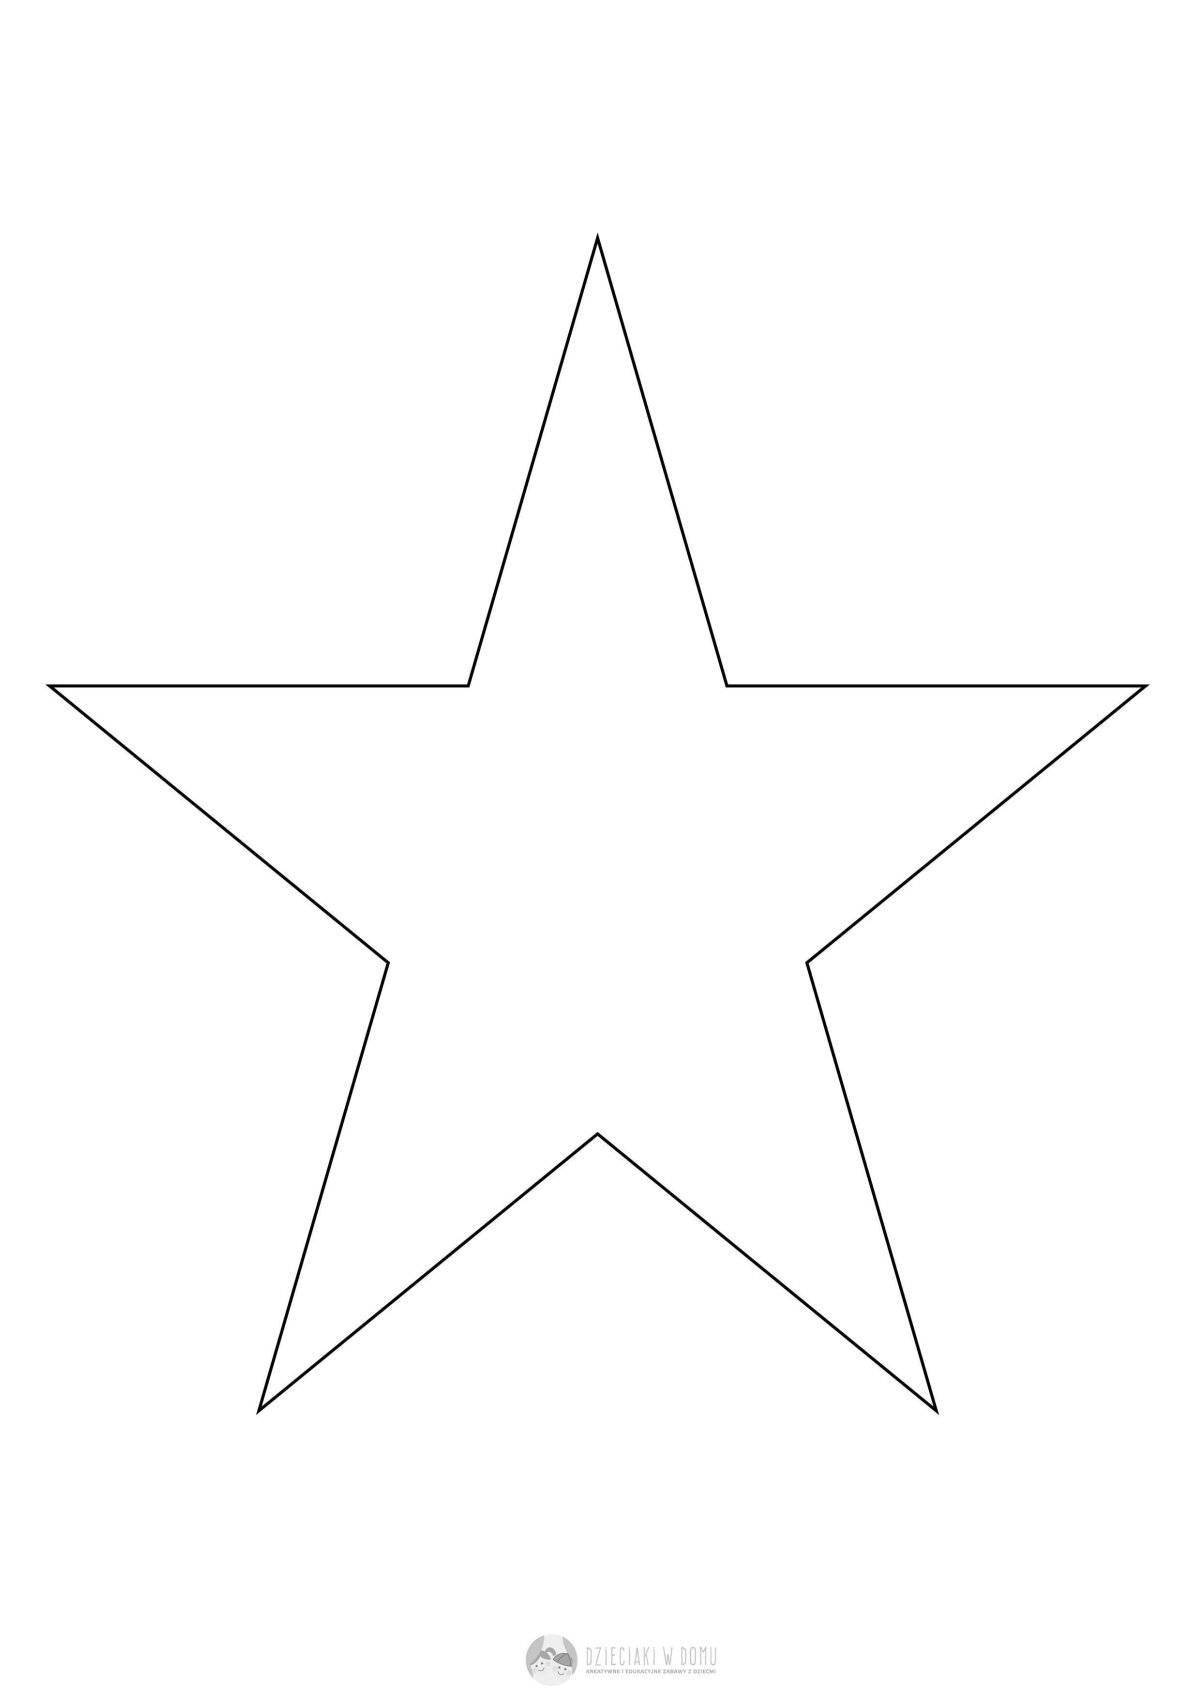 Fascinating six pointed star coloring page